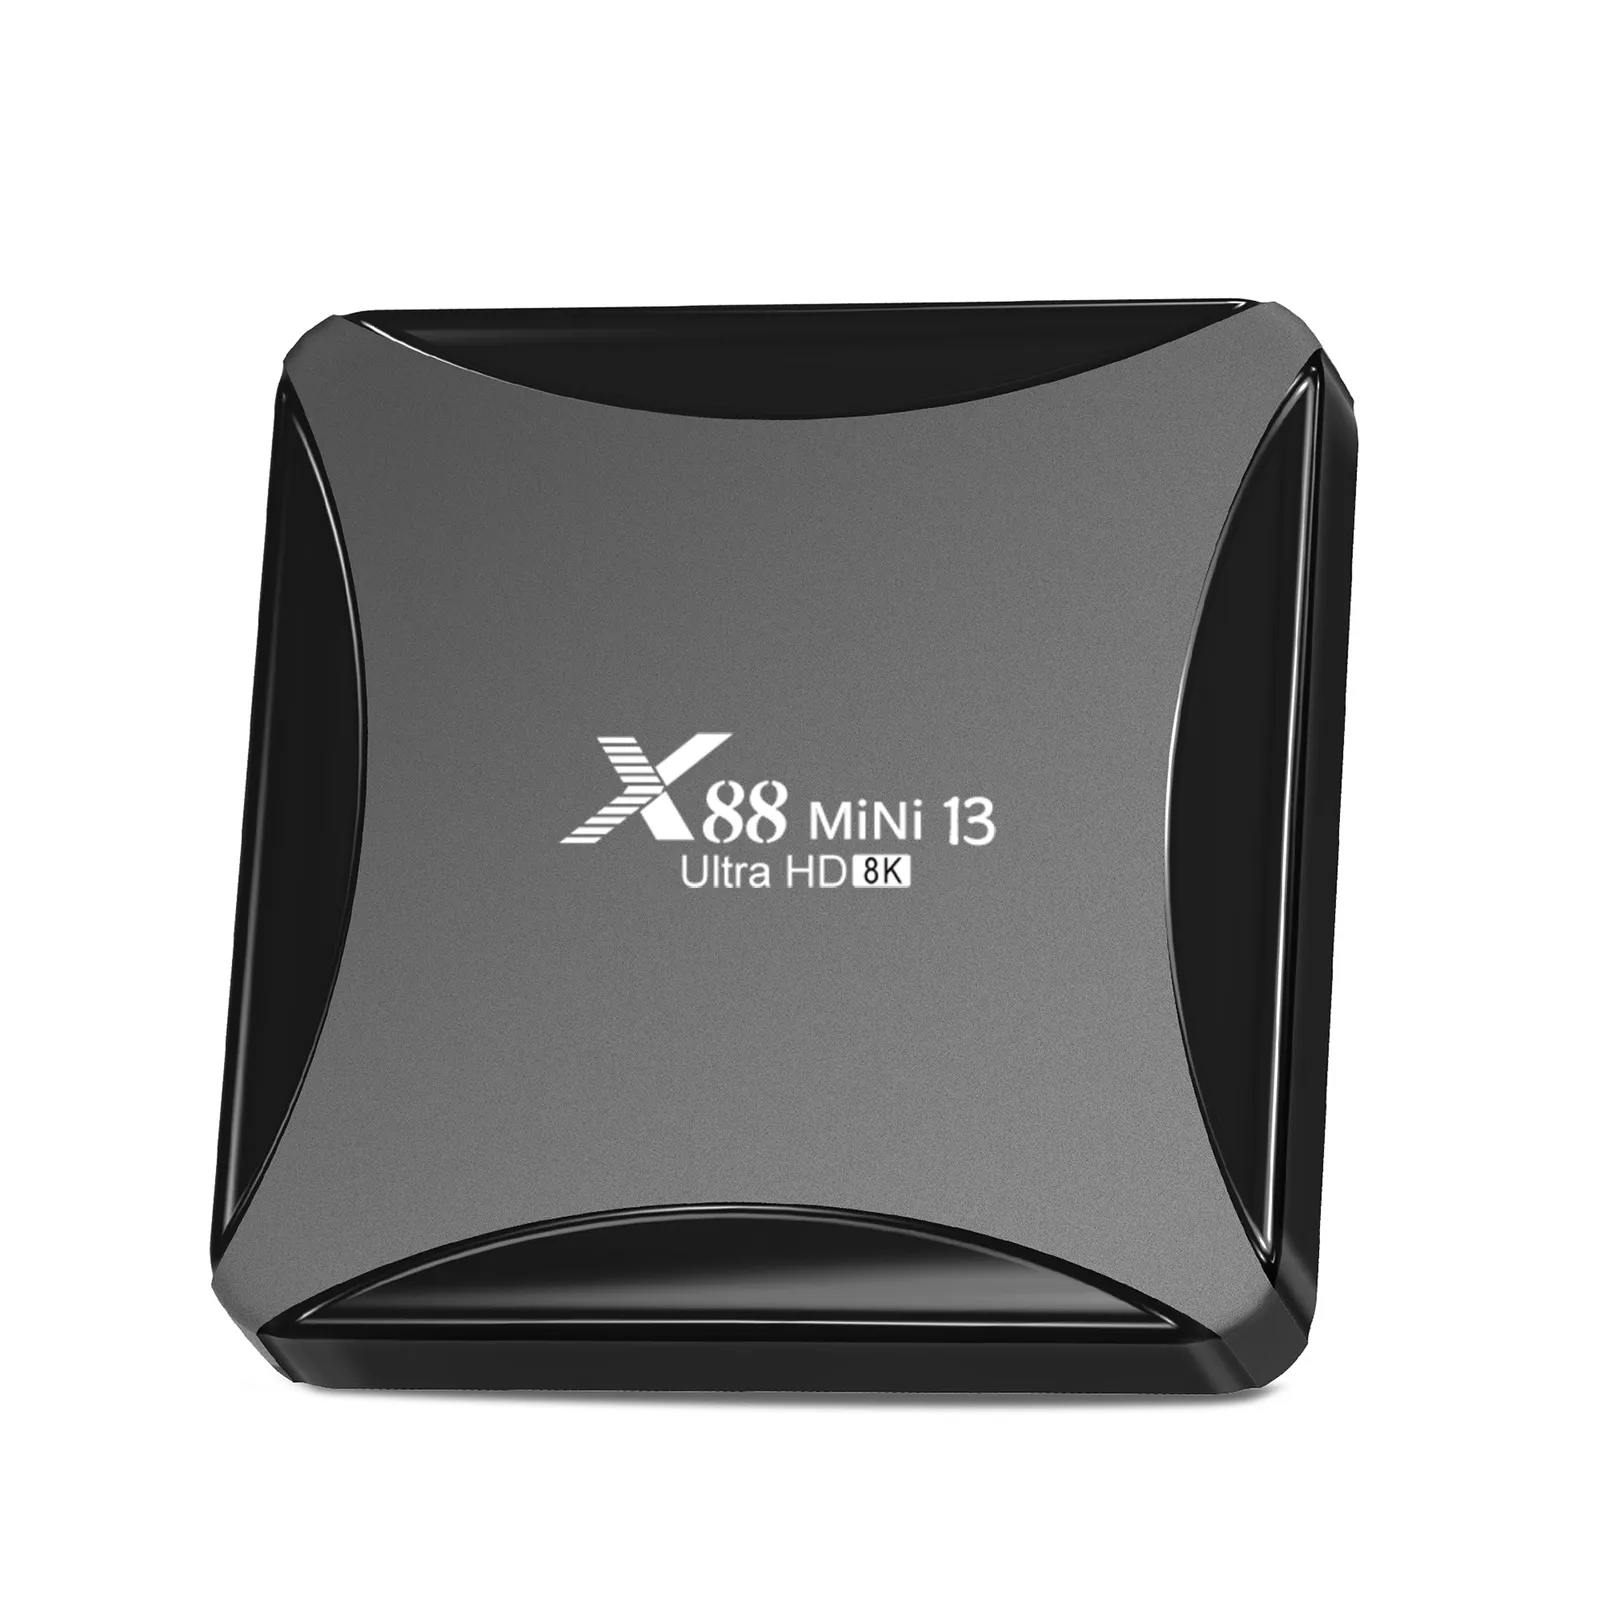 X88 MINI 13 Android 13 TV Box 4GB 64GB 8K Dual Band Wifi 4K Video Output  RK3528 From Xinyin10, $18.93